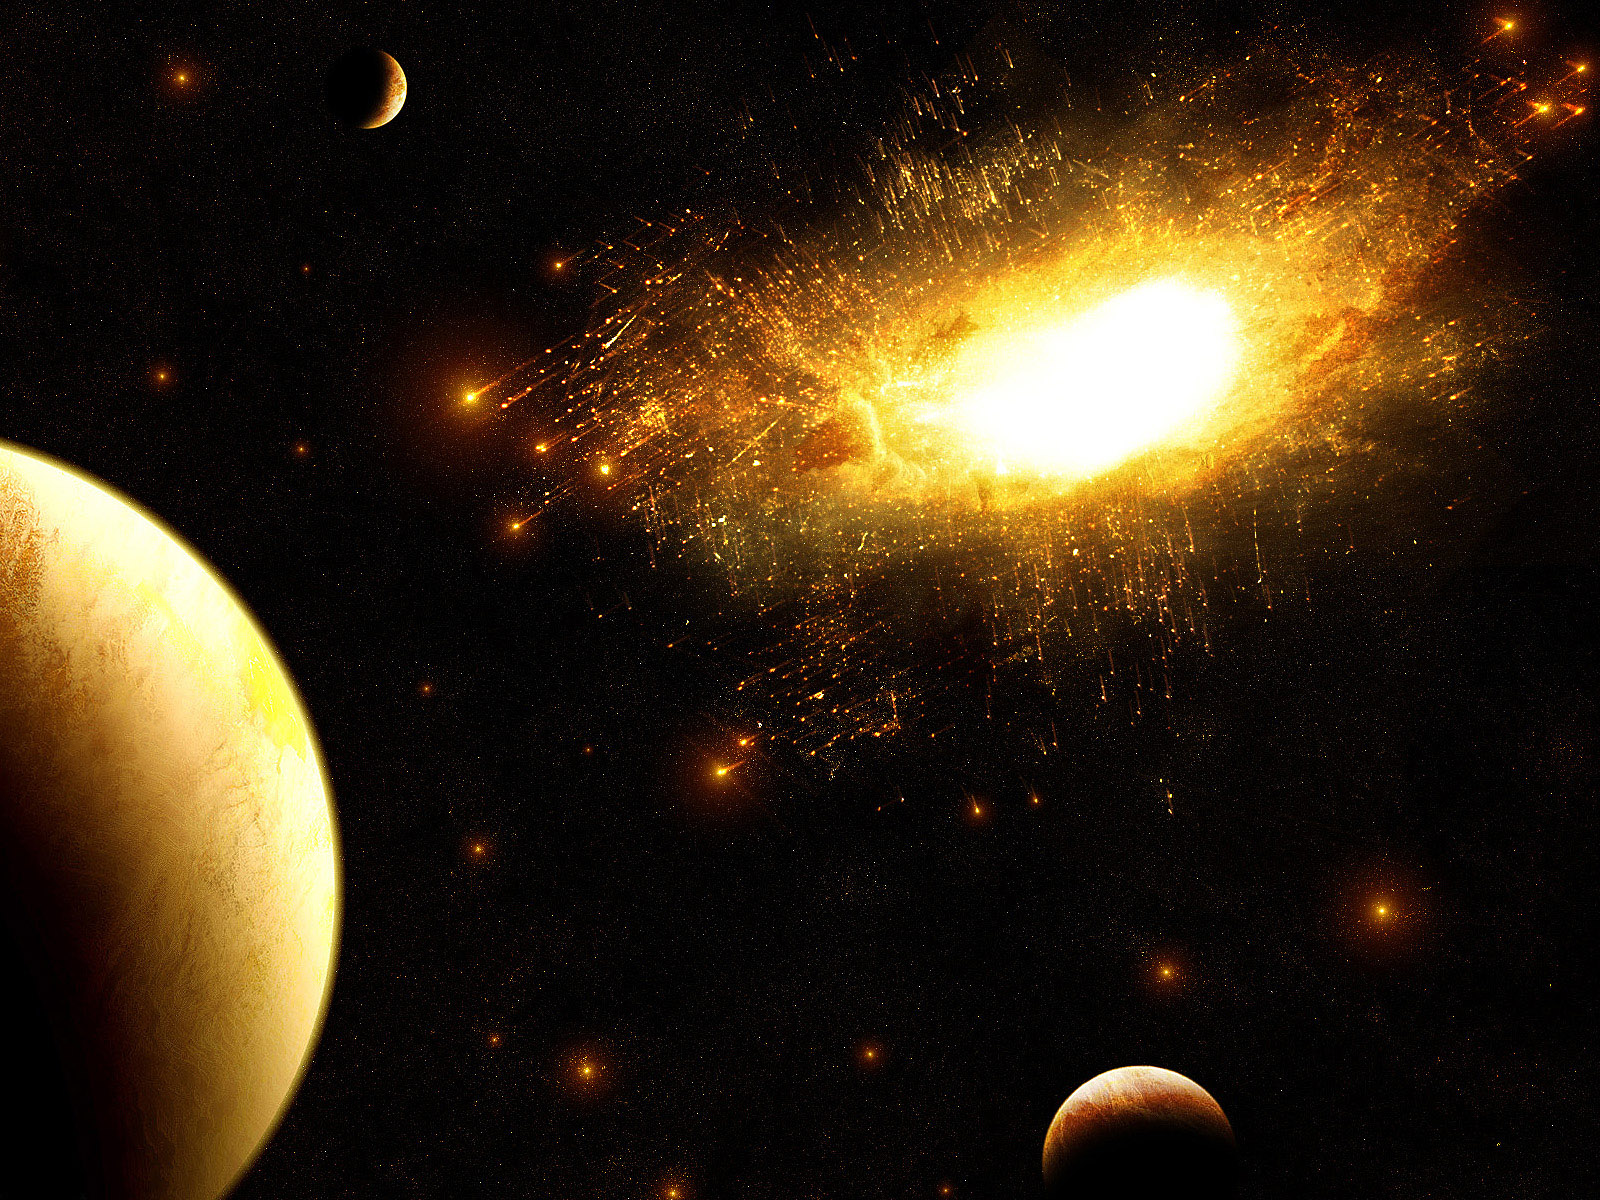 Download High quality 3d Space wallpaper / 3d And Digital Art / 1600x1200